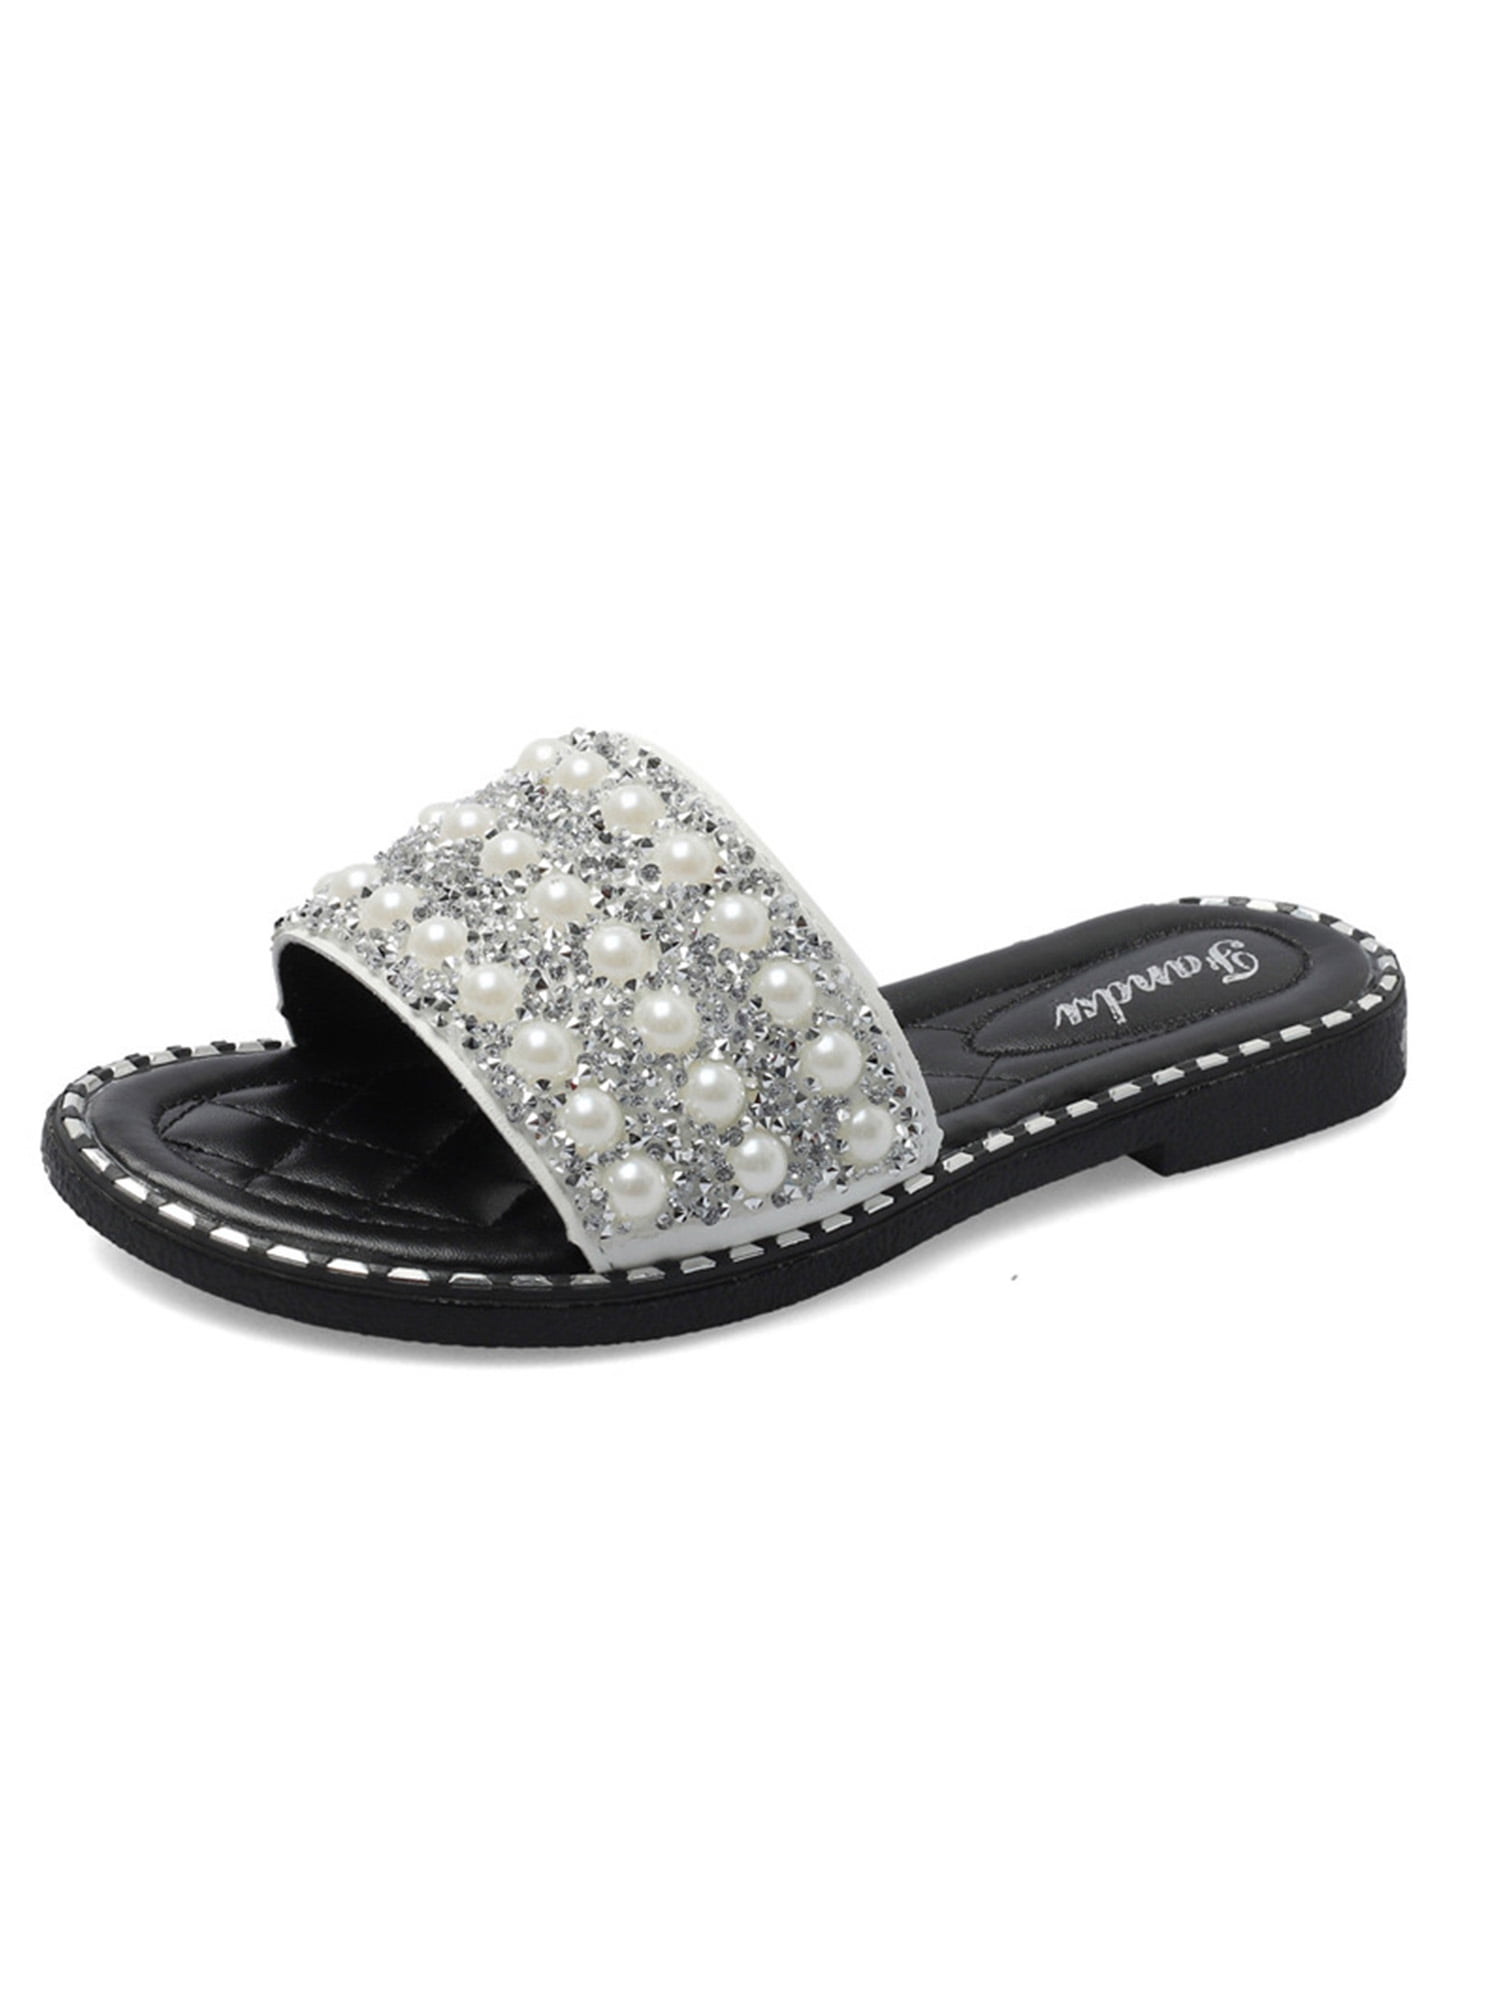 Details about   Womens Flat Summer Sandals Sliders Studded Slip On Comfort Open Toe Diamante New 